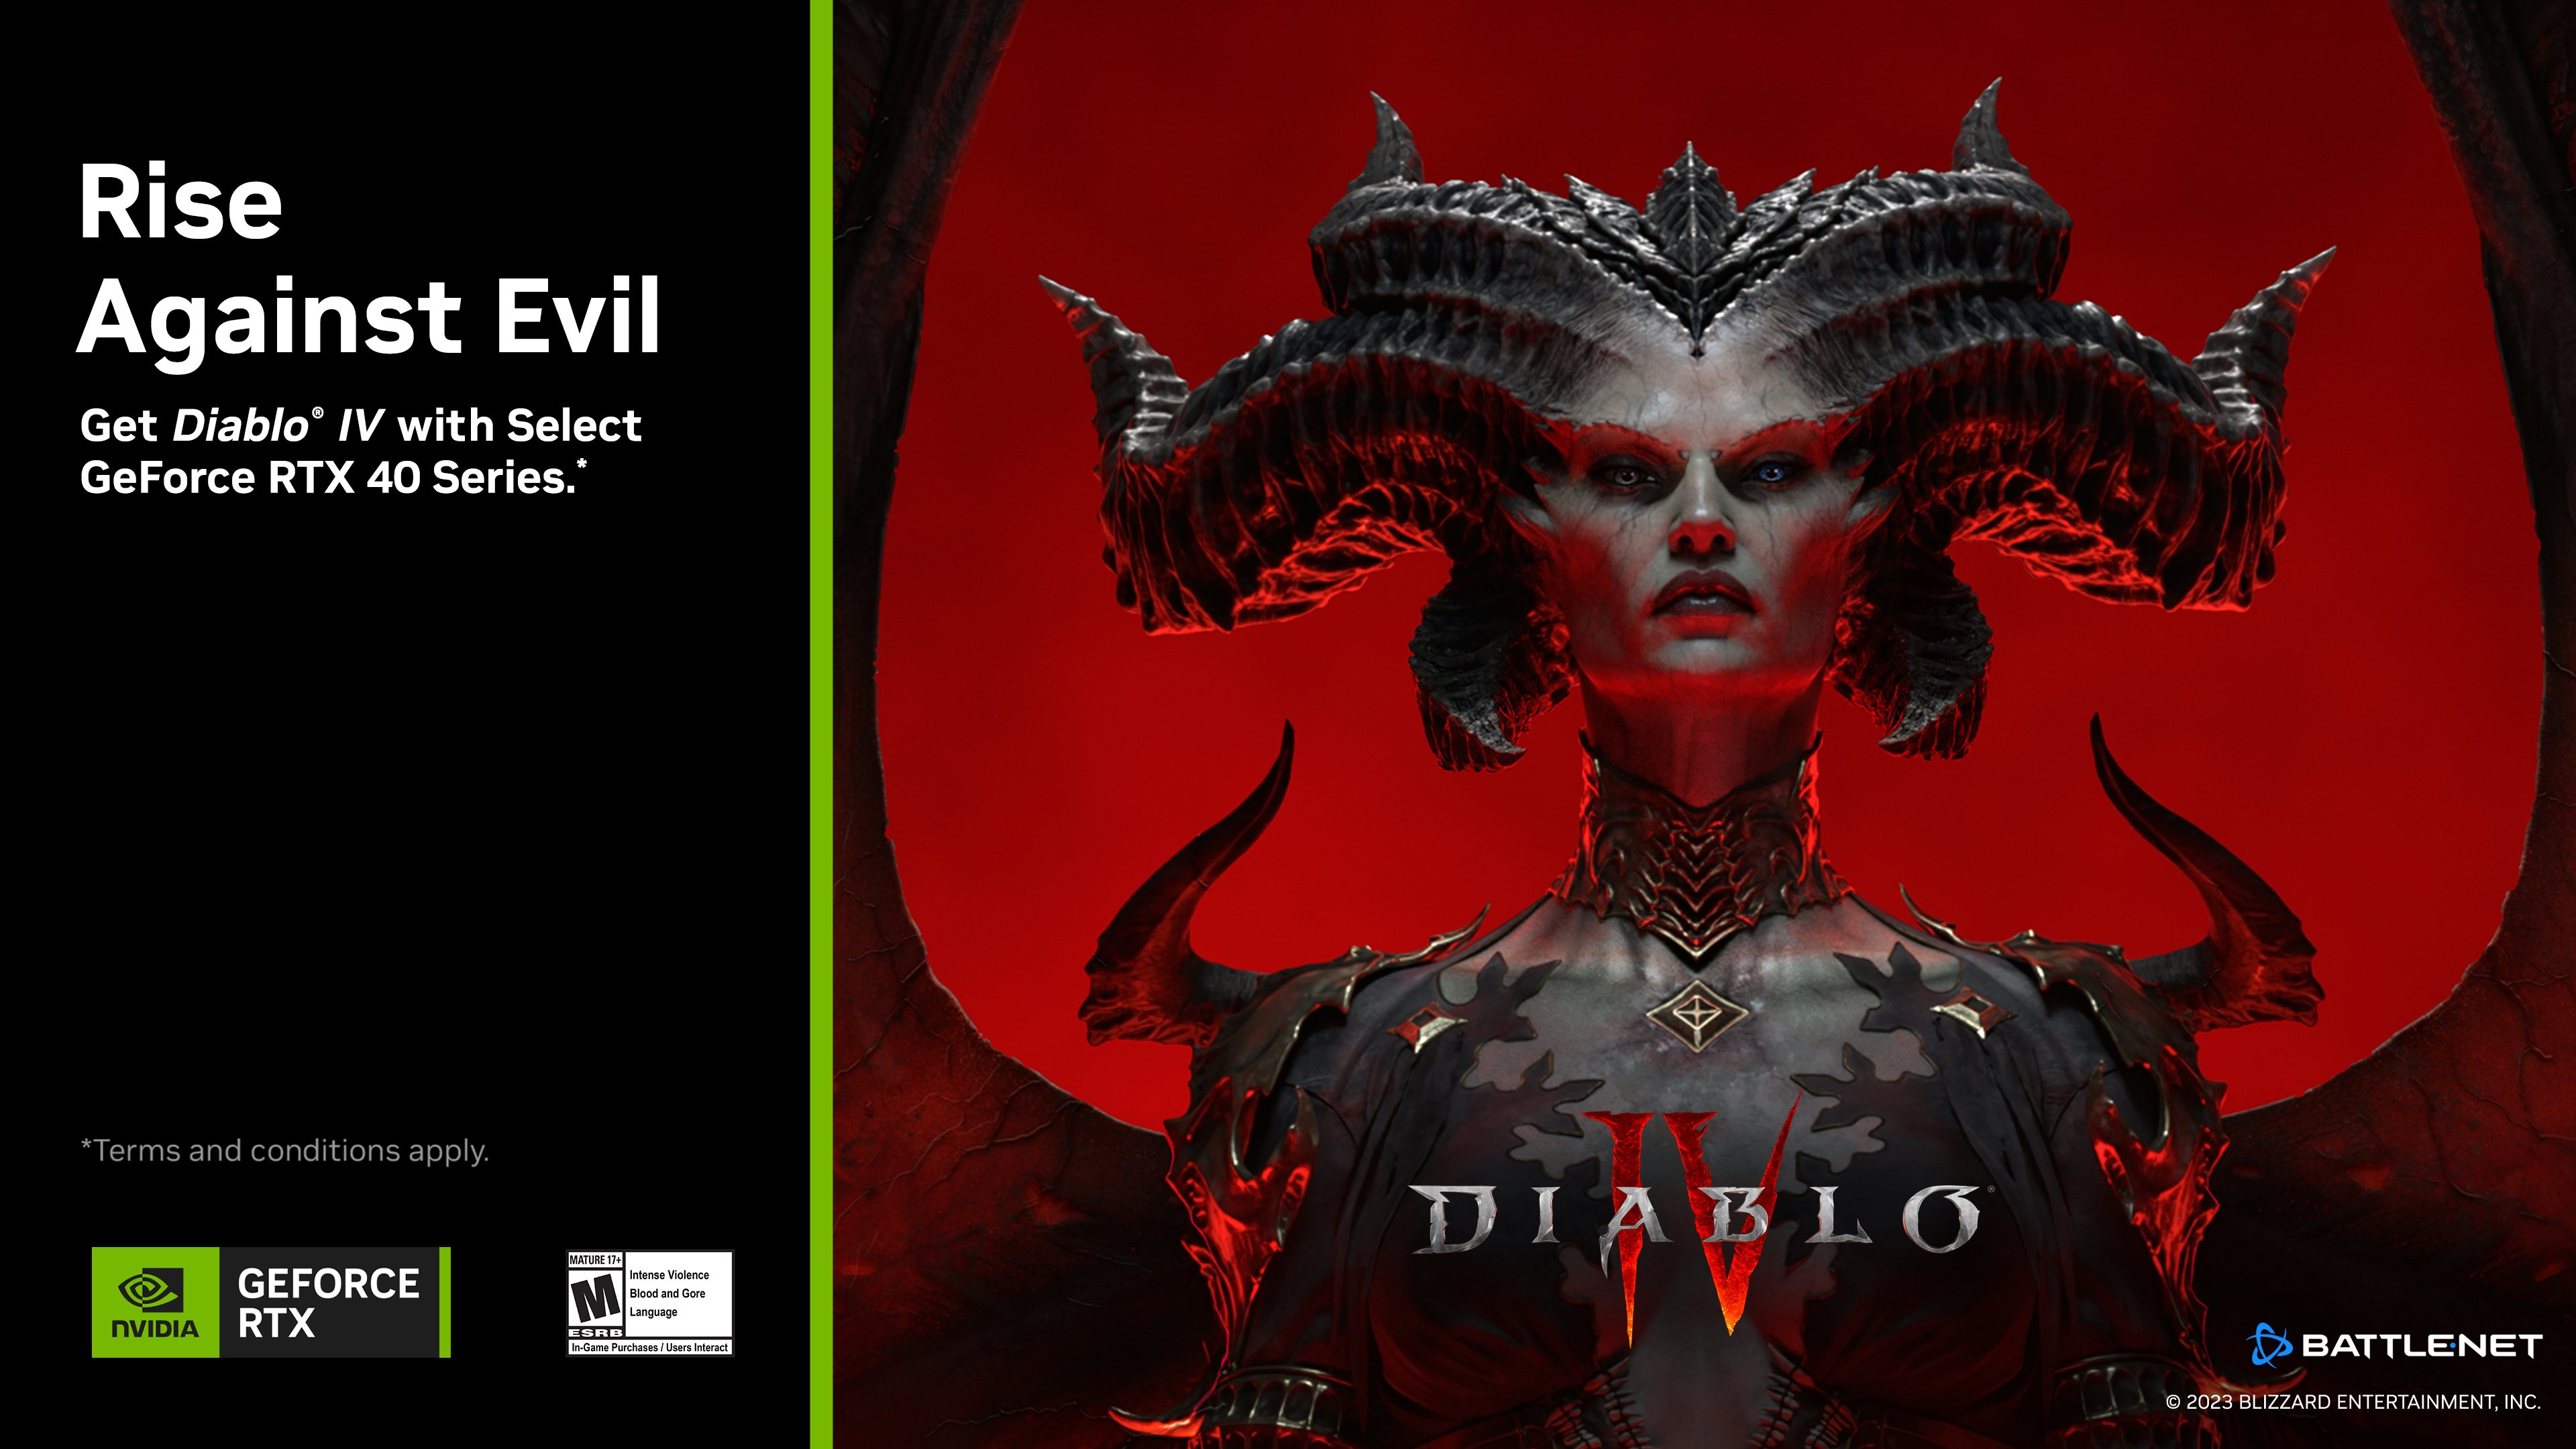 Diablo Immortal global on PC launch time for different regions around the  world - MEmu Blog